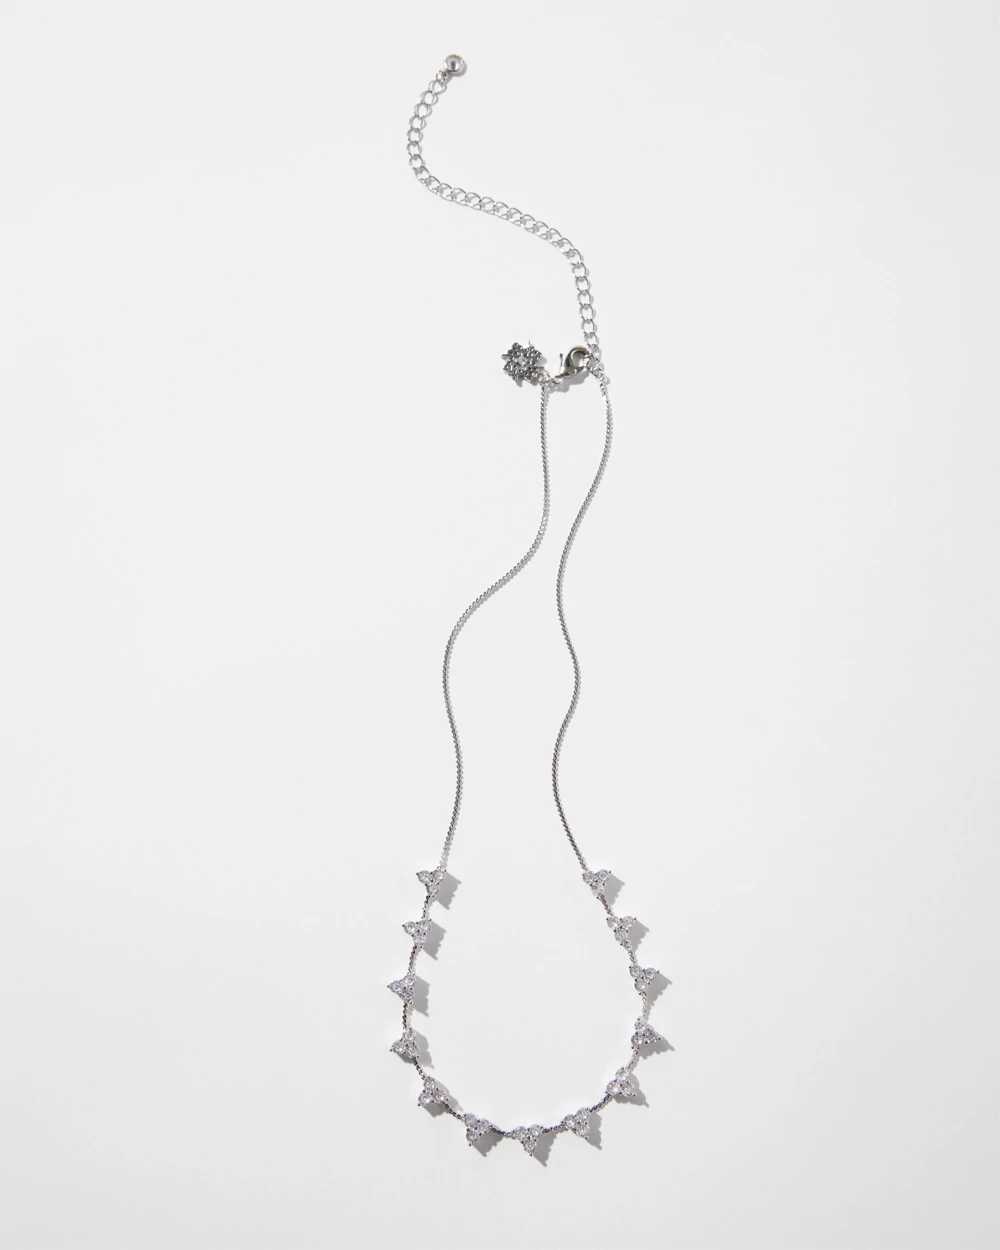 Silver Cluster Short Strand Necklace click to view larger image.